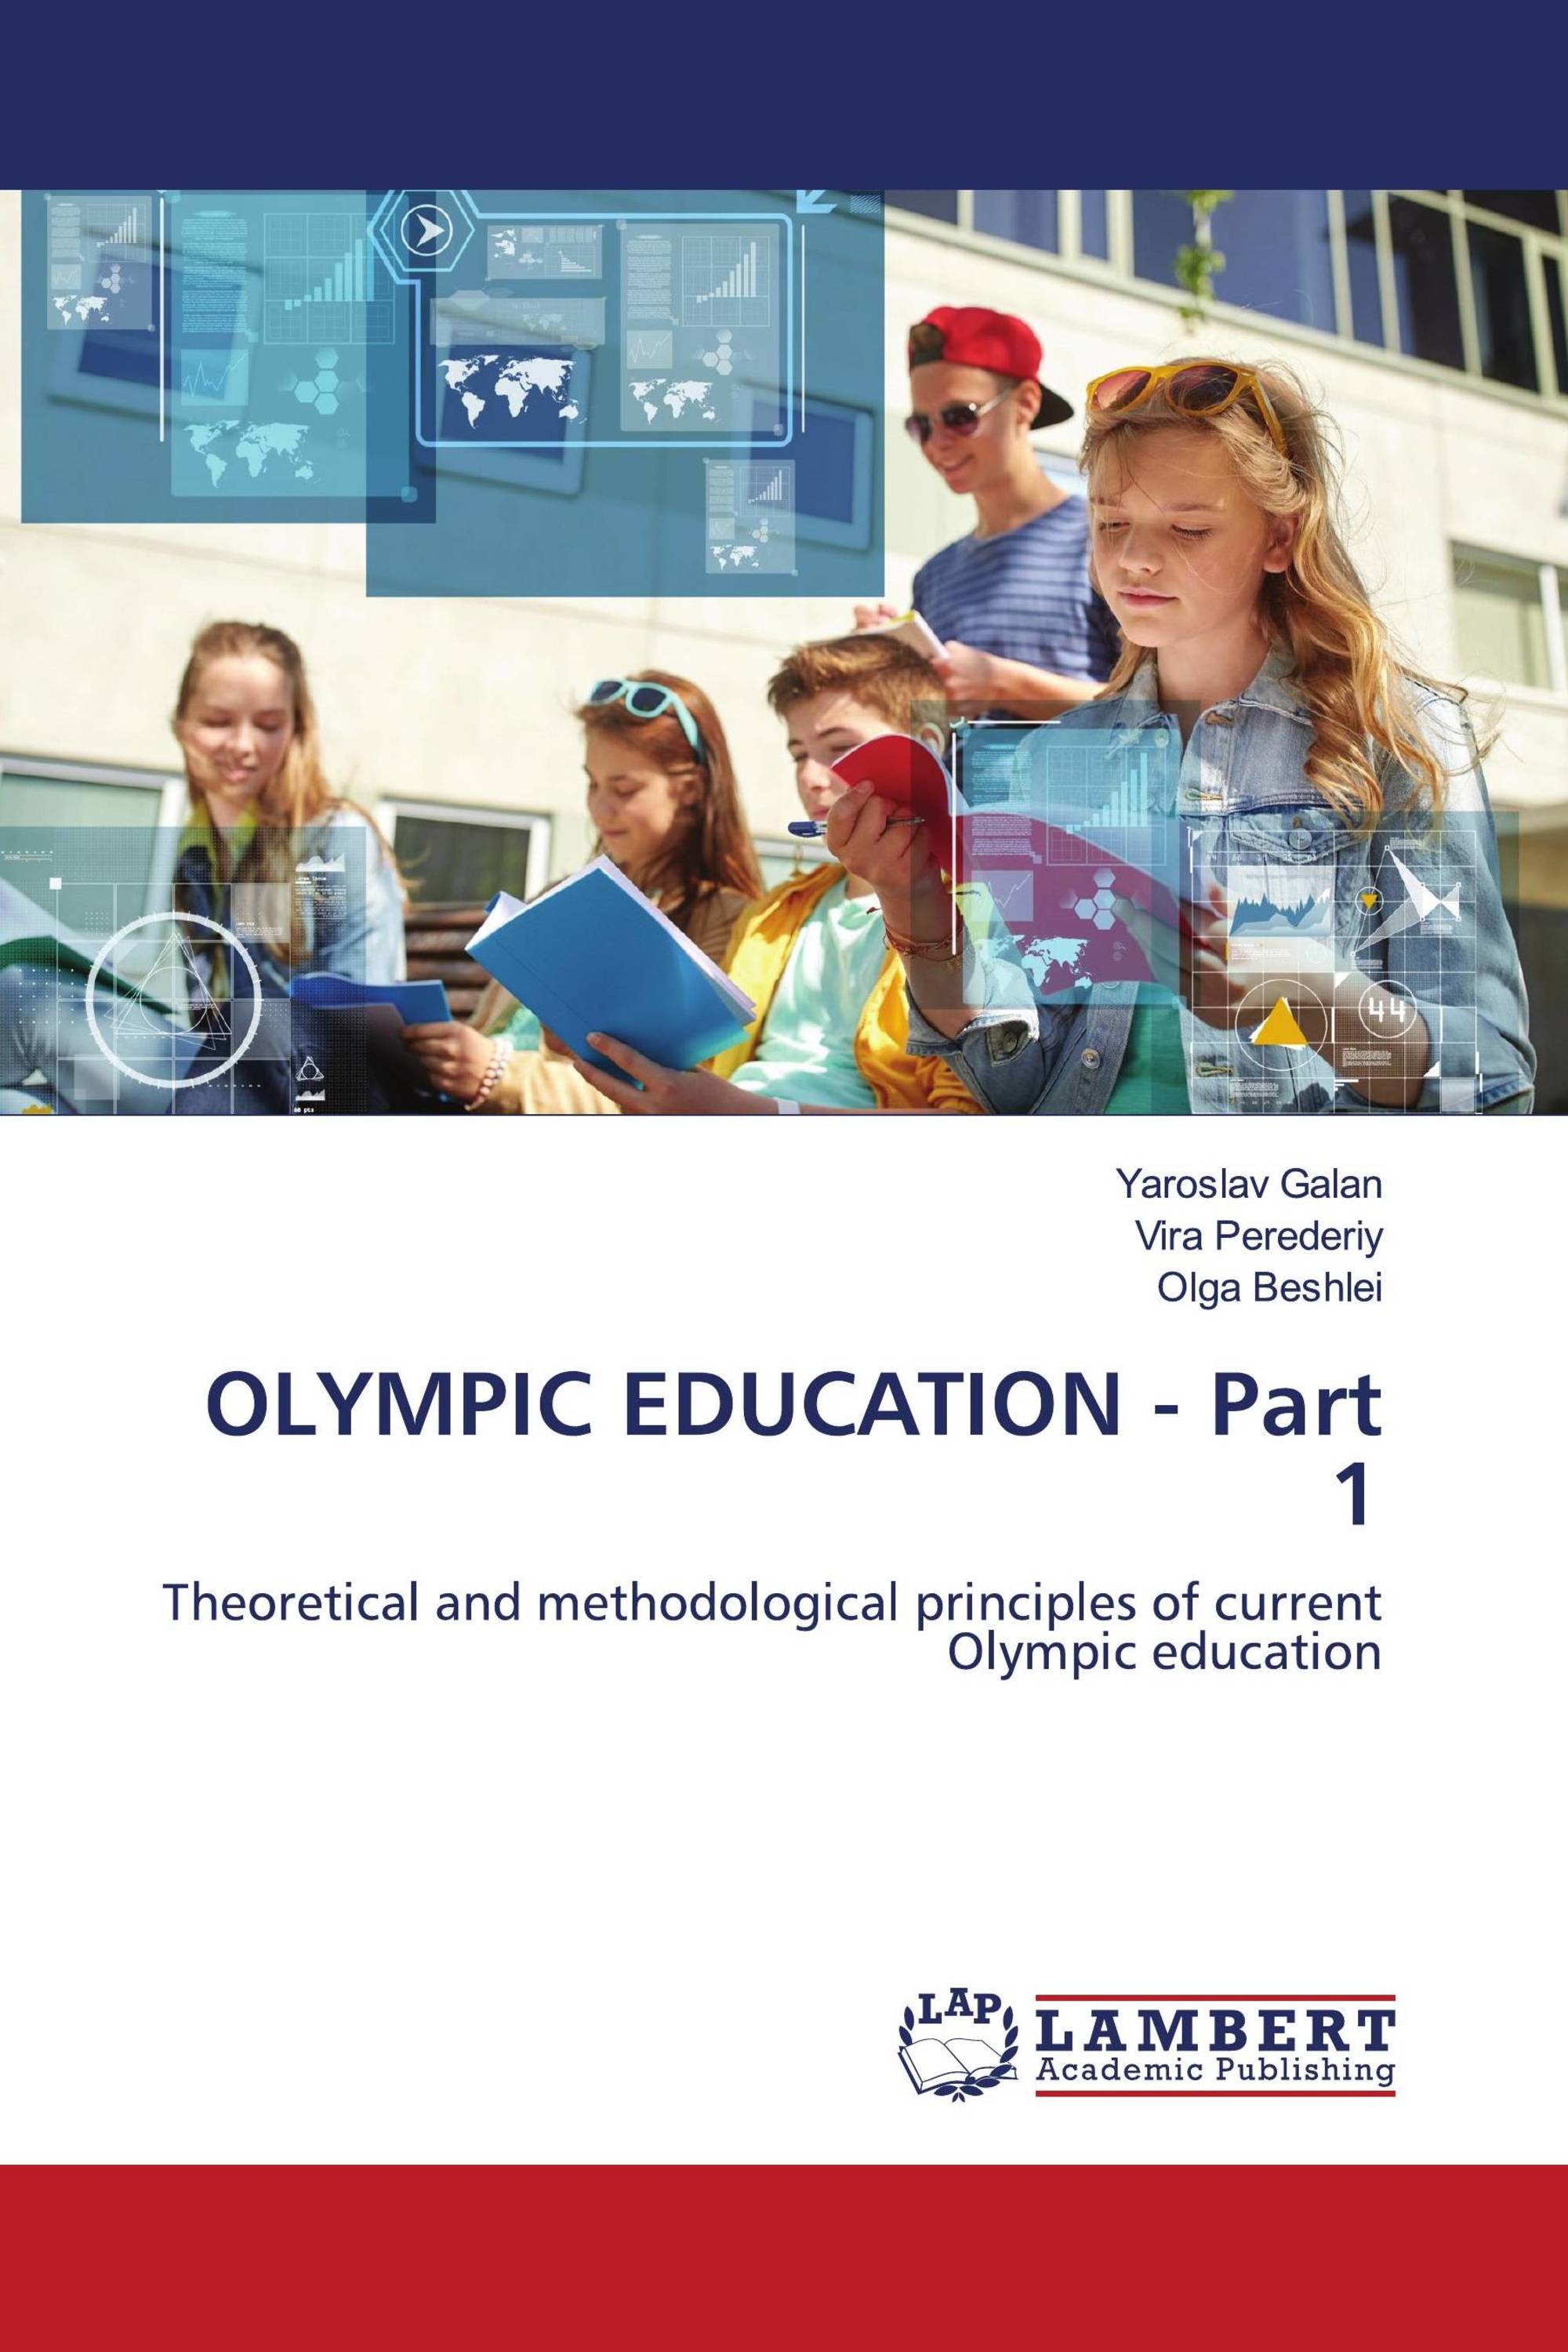 OLYMPIC EDUCATION - Part 1